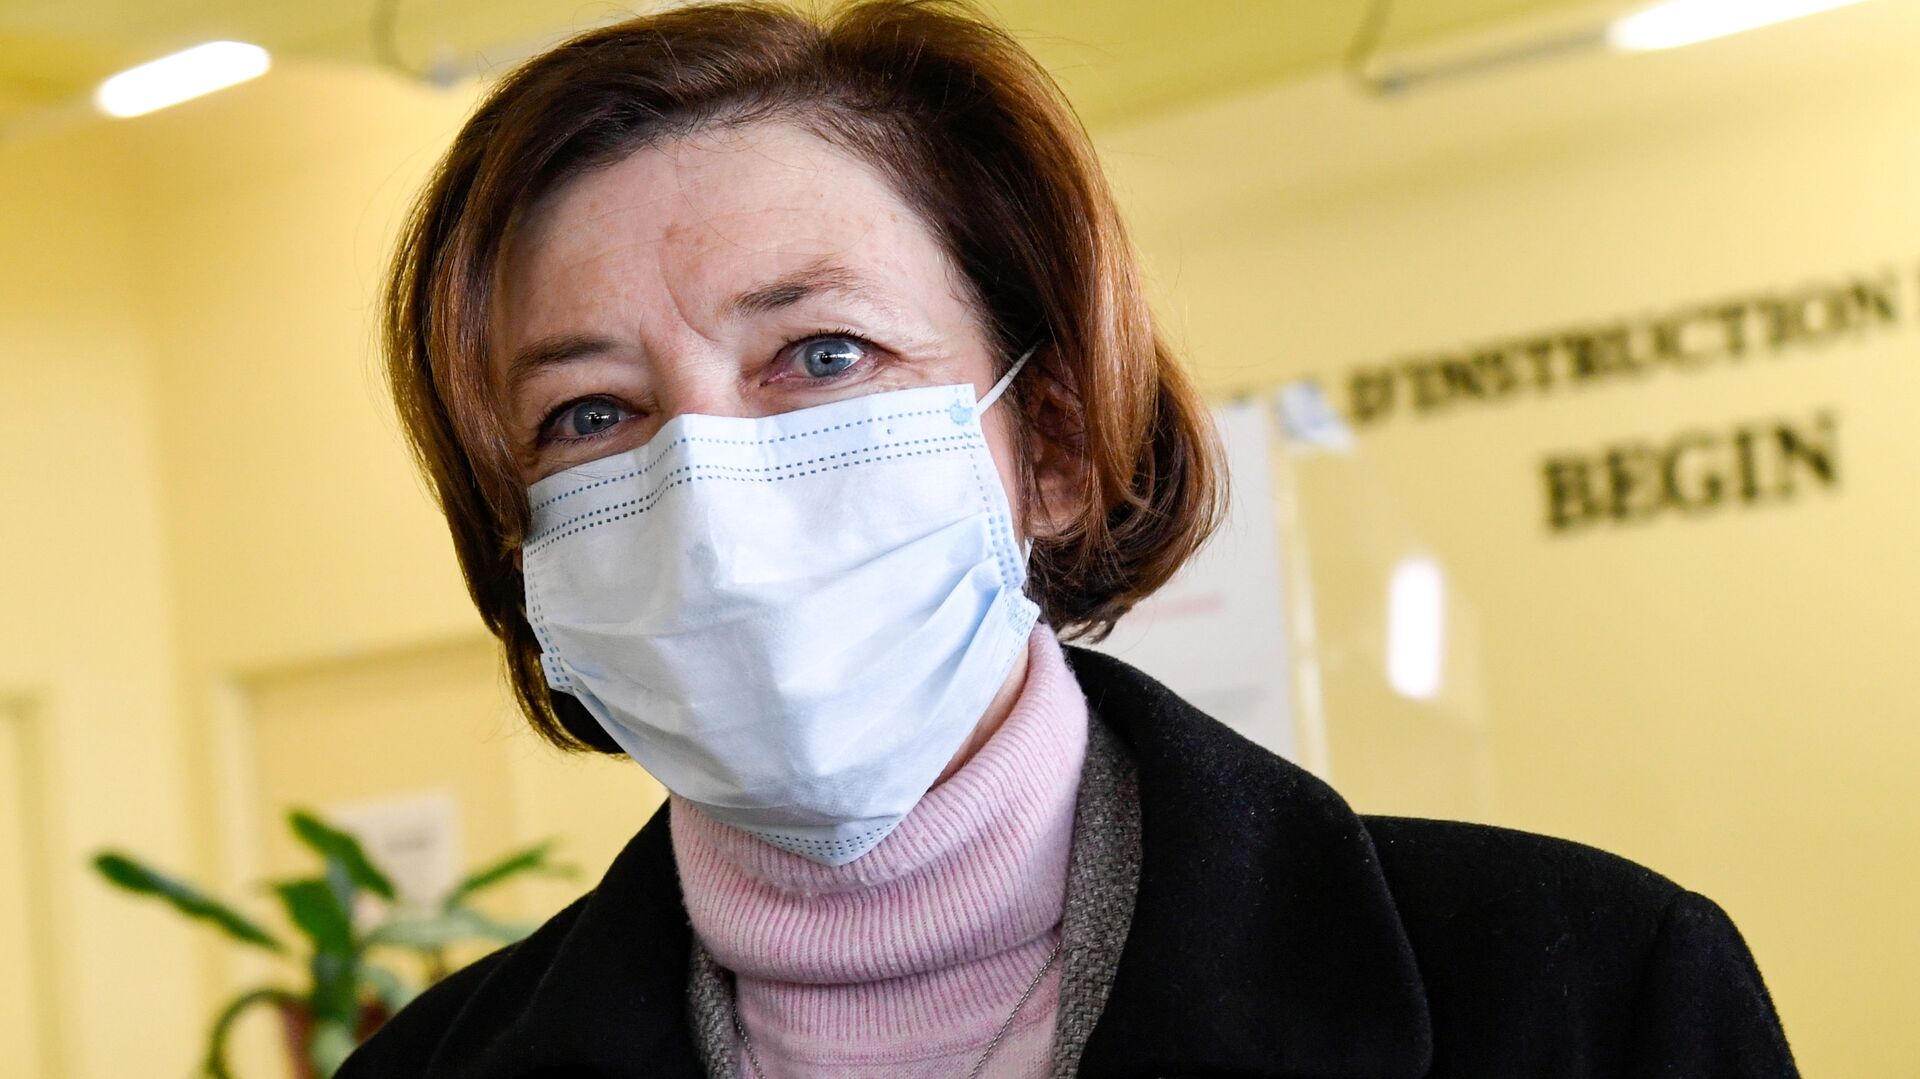 French Defence Minister Florence Parly wearing a protective face mask, visits a vaccination centre in the HIA Begin military hospital, in Saint-Mande, southeast of Paris, France March 7, 2021 - Sputnik International, 1920, 19.12.2021